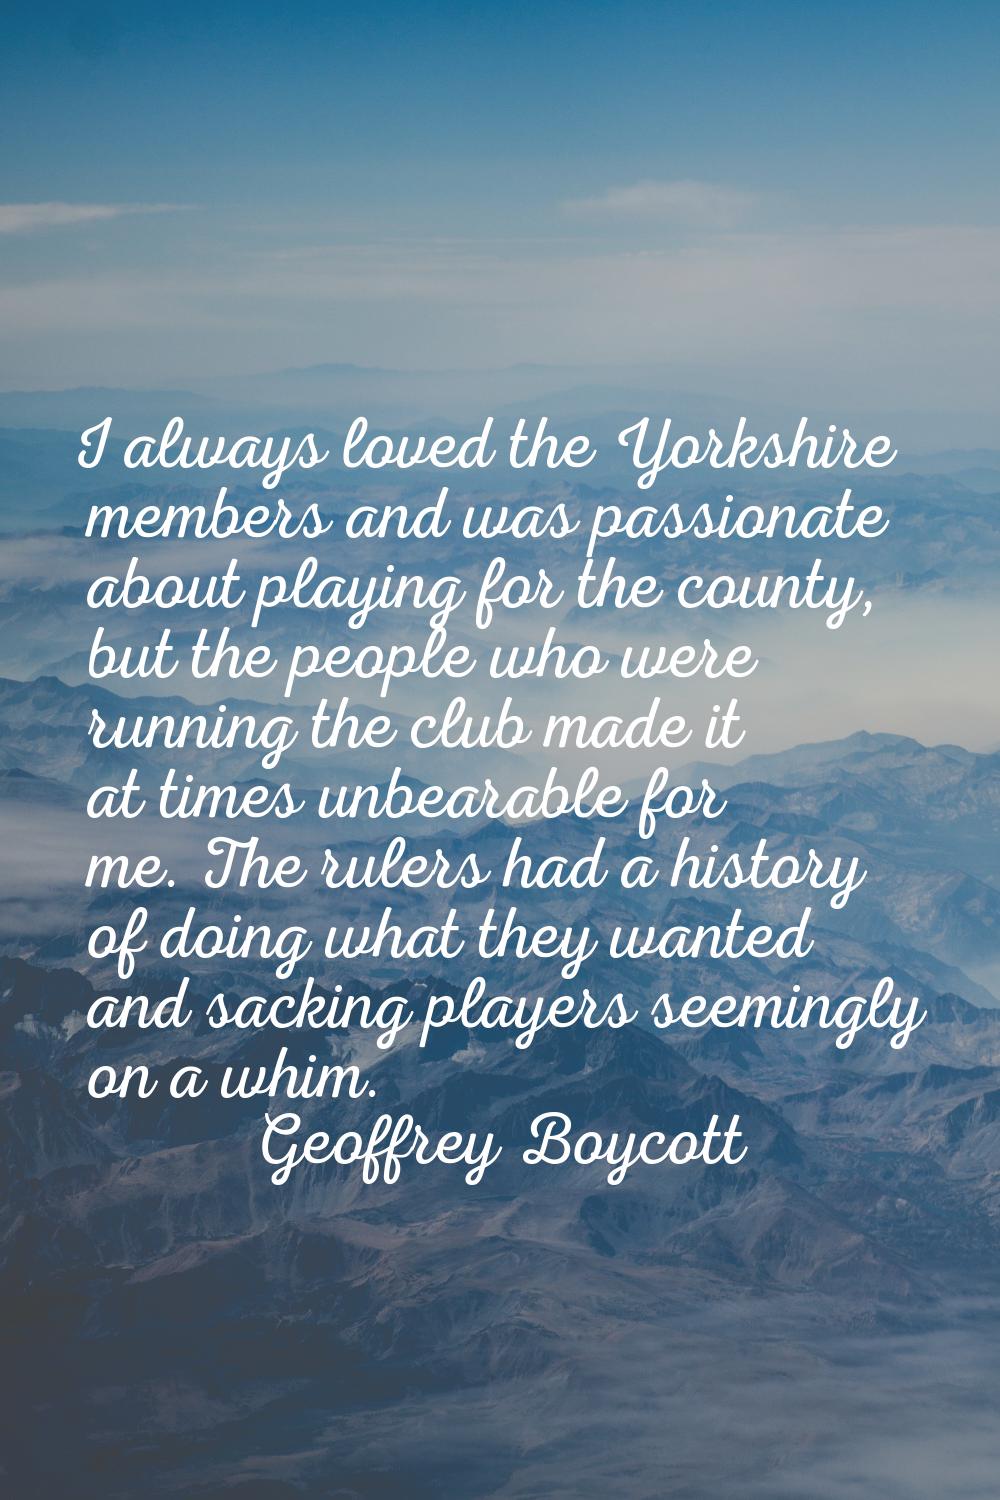 I always loved the Yorkshire members and was passionate about playing for the county, but the peopl